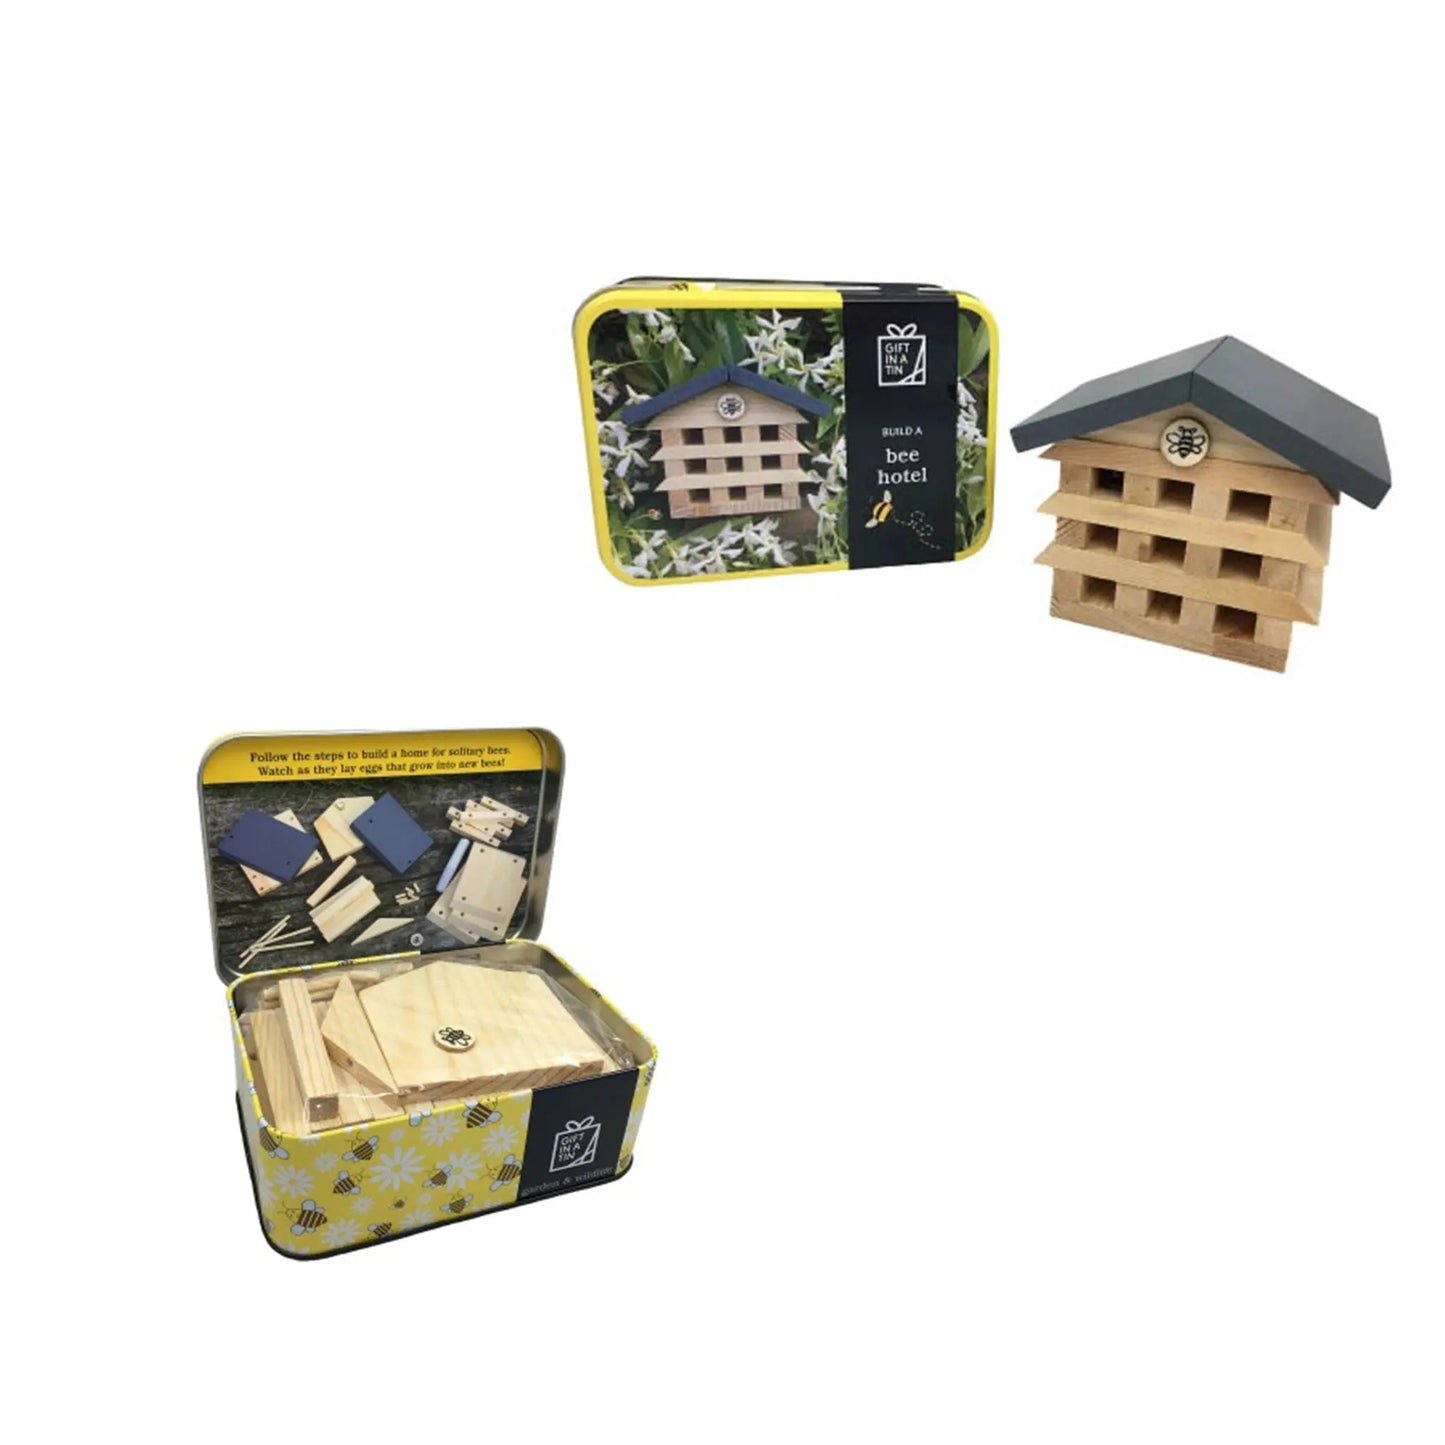 Build a Bee Hotel Craft kit in a tin - Apples to Pears - The Forgotten Toy Shop